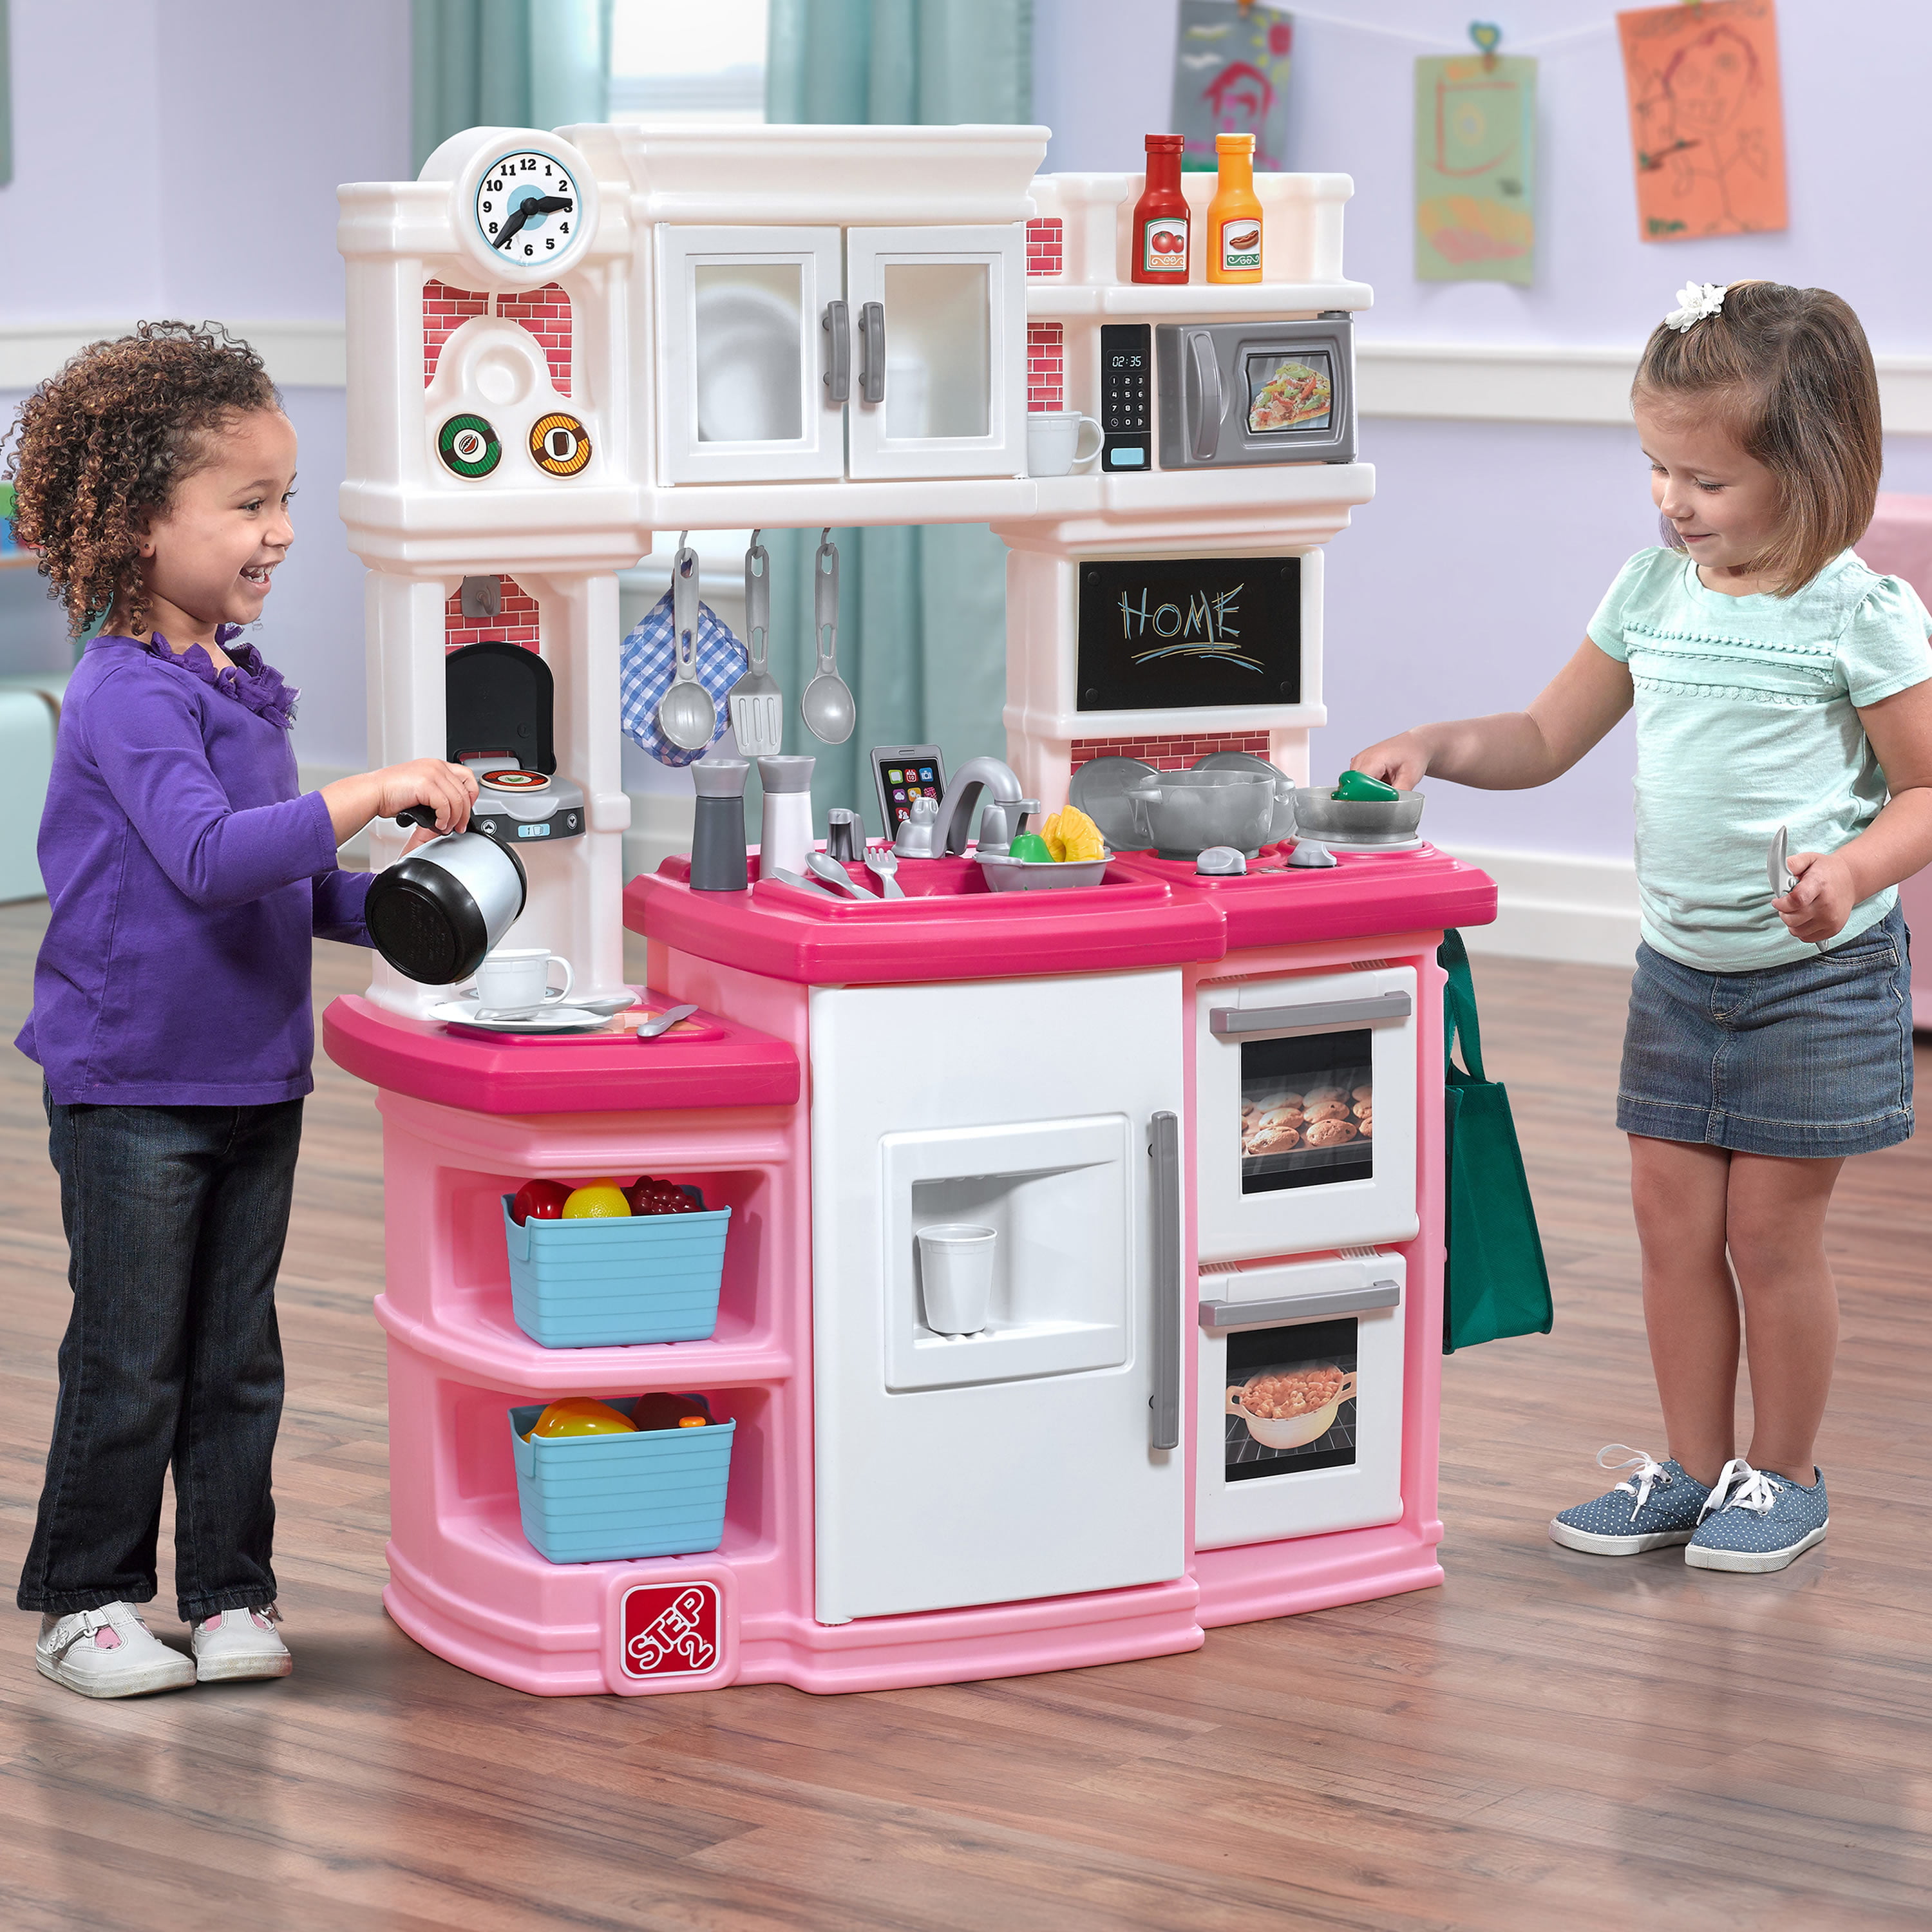 Step2 Great Gourmet Kitchen Set Pink Play Pretend Cooking Kids Play Toy